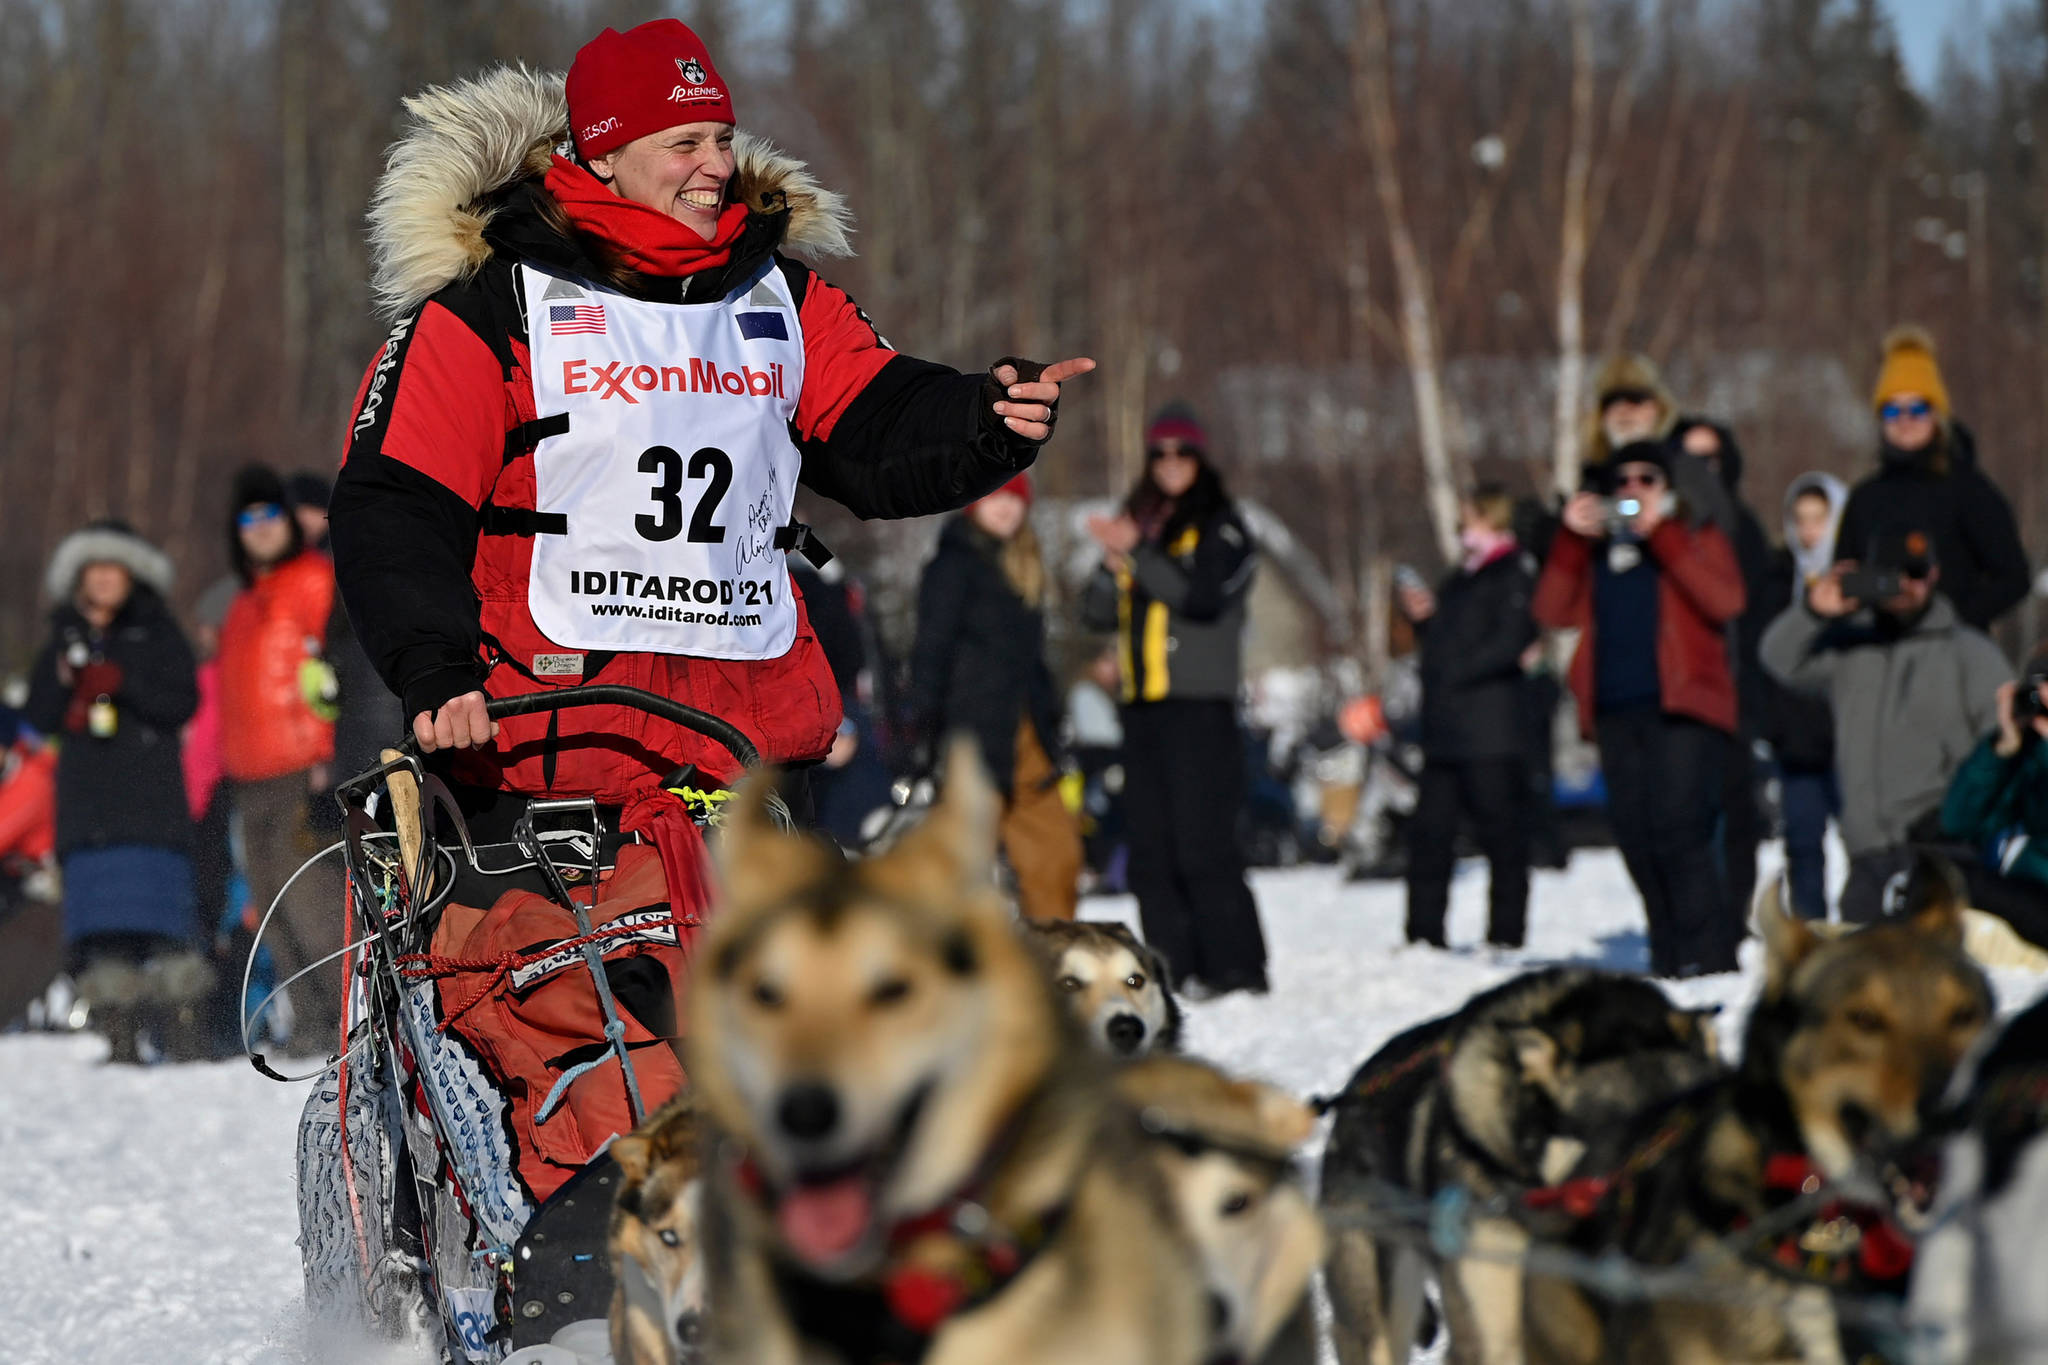 Aliy Zirkle, of Two Rivers, greets fans as she passes by at the Iditarod Sled Dog Race start at Deshka Landing in Willow, Alaska, Sunday, March 7, 2021. (Marc Lester / Anchorage Daily News)